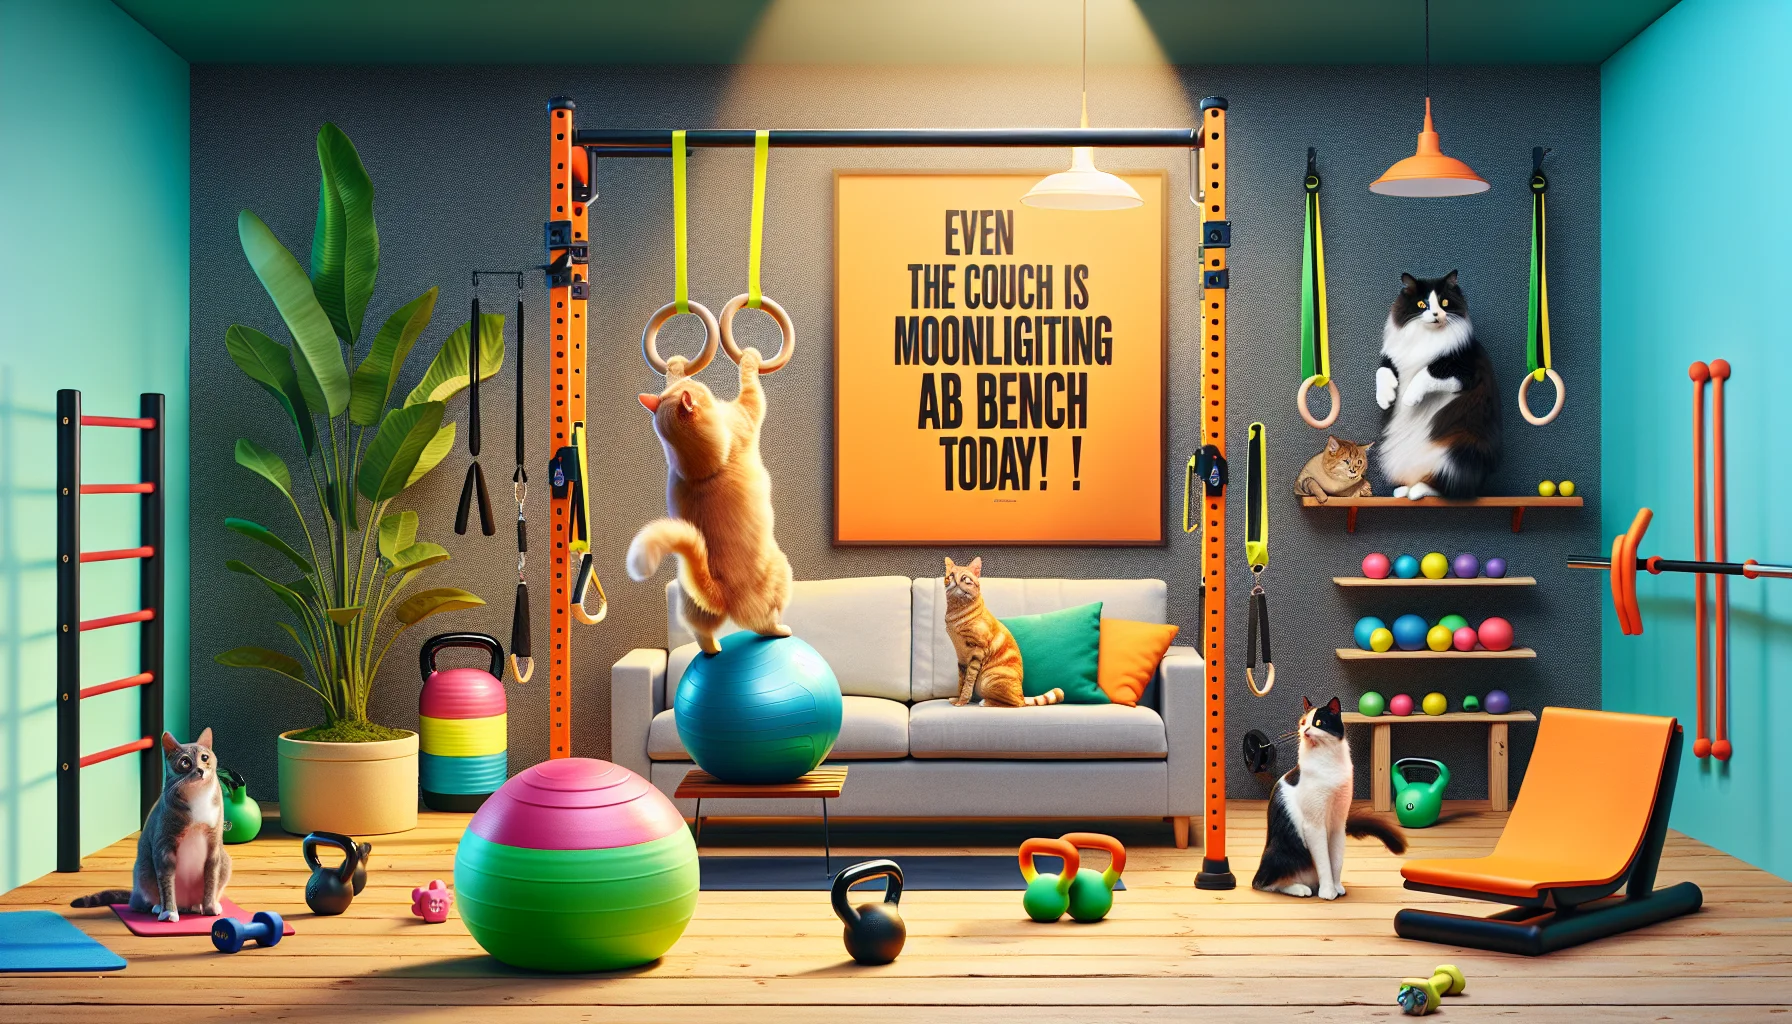 Create a humorous image of a lively living room scene. In the middle, there's a modern, home calisthenics equipment painted in bright neon colors: hanging rings, barbells, kettlebells, pull-up bars, and resistance bands. Strikingly, a playful orange cat tries to balance on a yoga ball while another black and white feline spectates from the colorful resistance band, both adding to the quirky mood. A giant indoor plant playfully tries to 'lift' a kettlebell with its branches, and a motivational quote on the wall reads, 'Even the couch is moonlighting as an ab bench today!' enticing viewers to get moving.